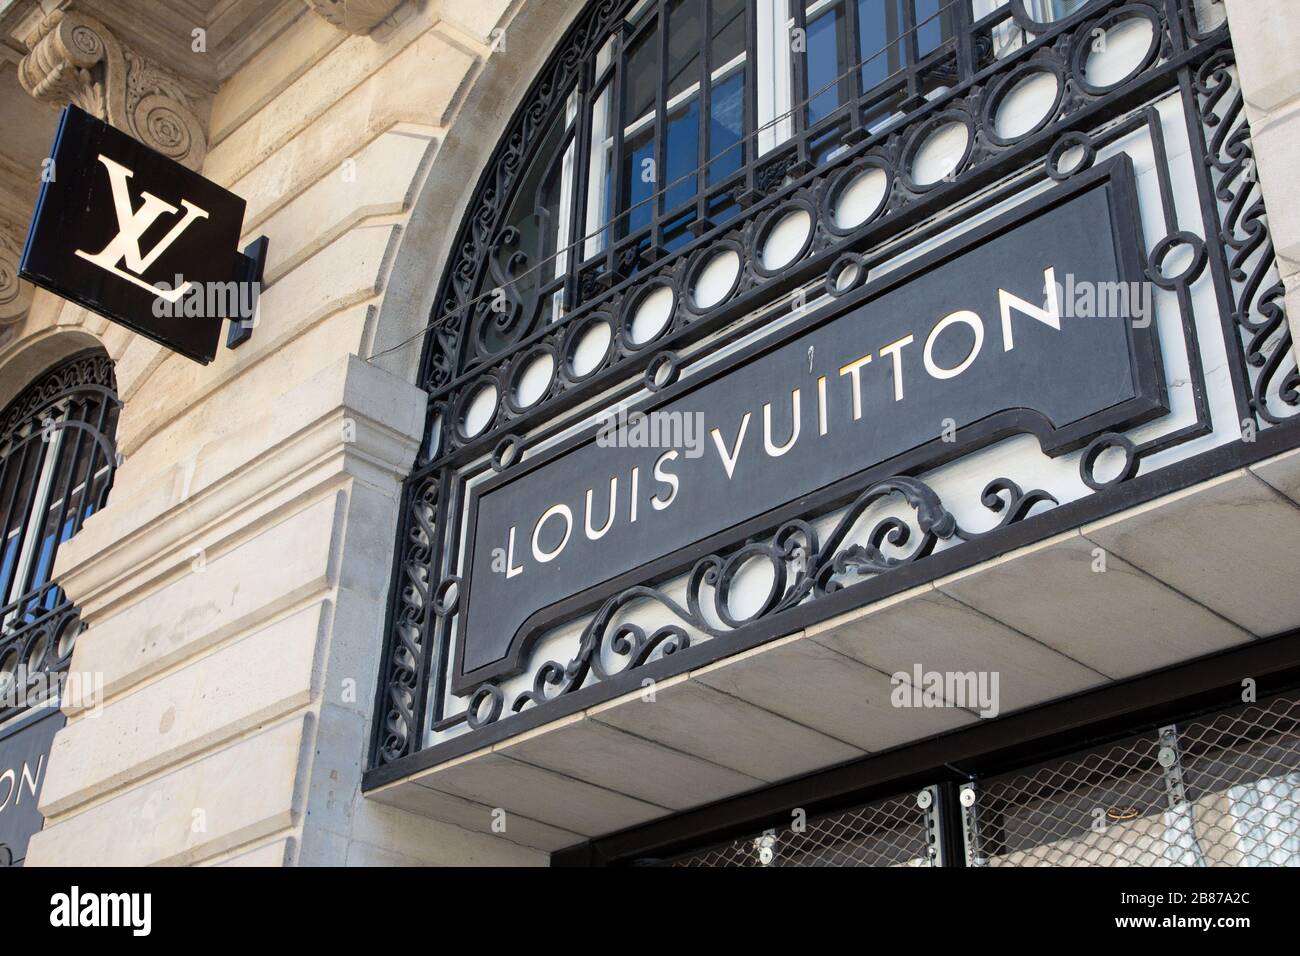 Bordeaux , Aquitaine / France - 11 25 2019 : Louis Vuitton Logo Store Sign  Luxury Brand Shop Handbags Luggage Editorial Stock Image - Image of city,  expensive: 165062019